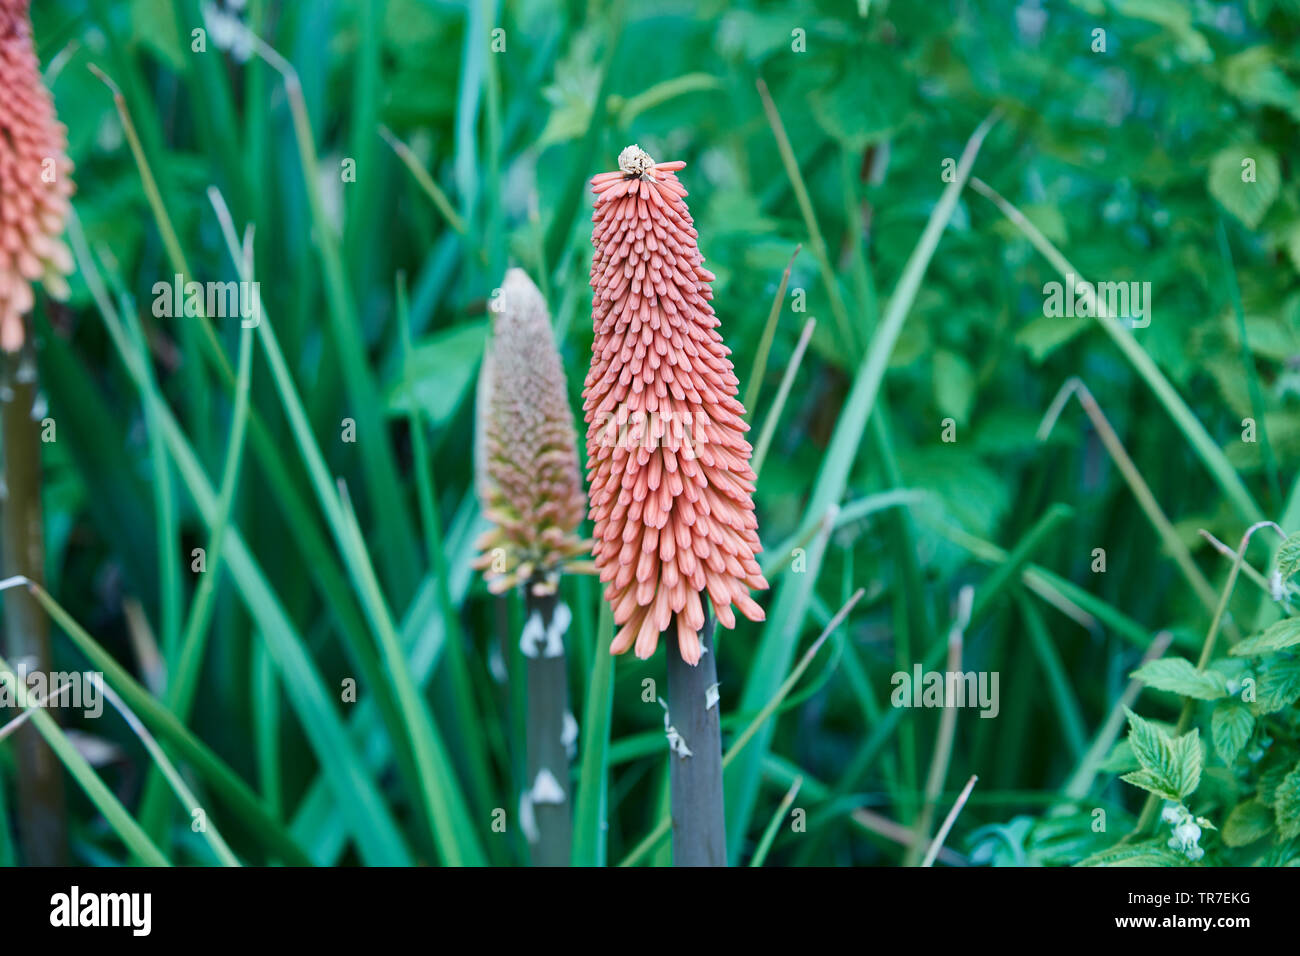 A single stem and flower of a red kniphofia plant in a garden, Stock Photo